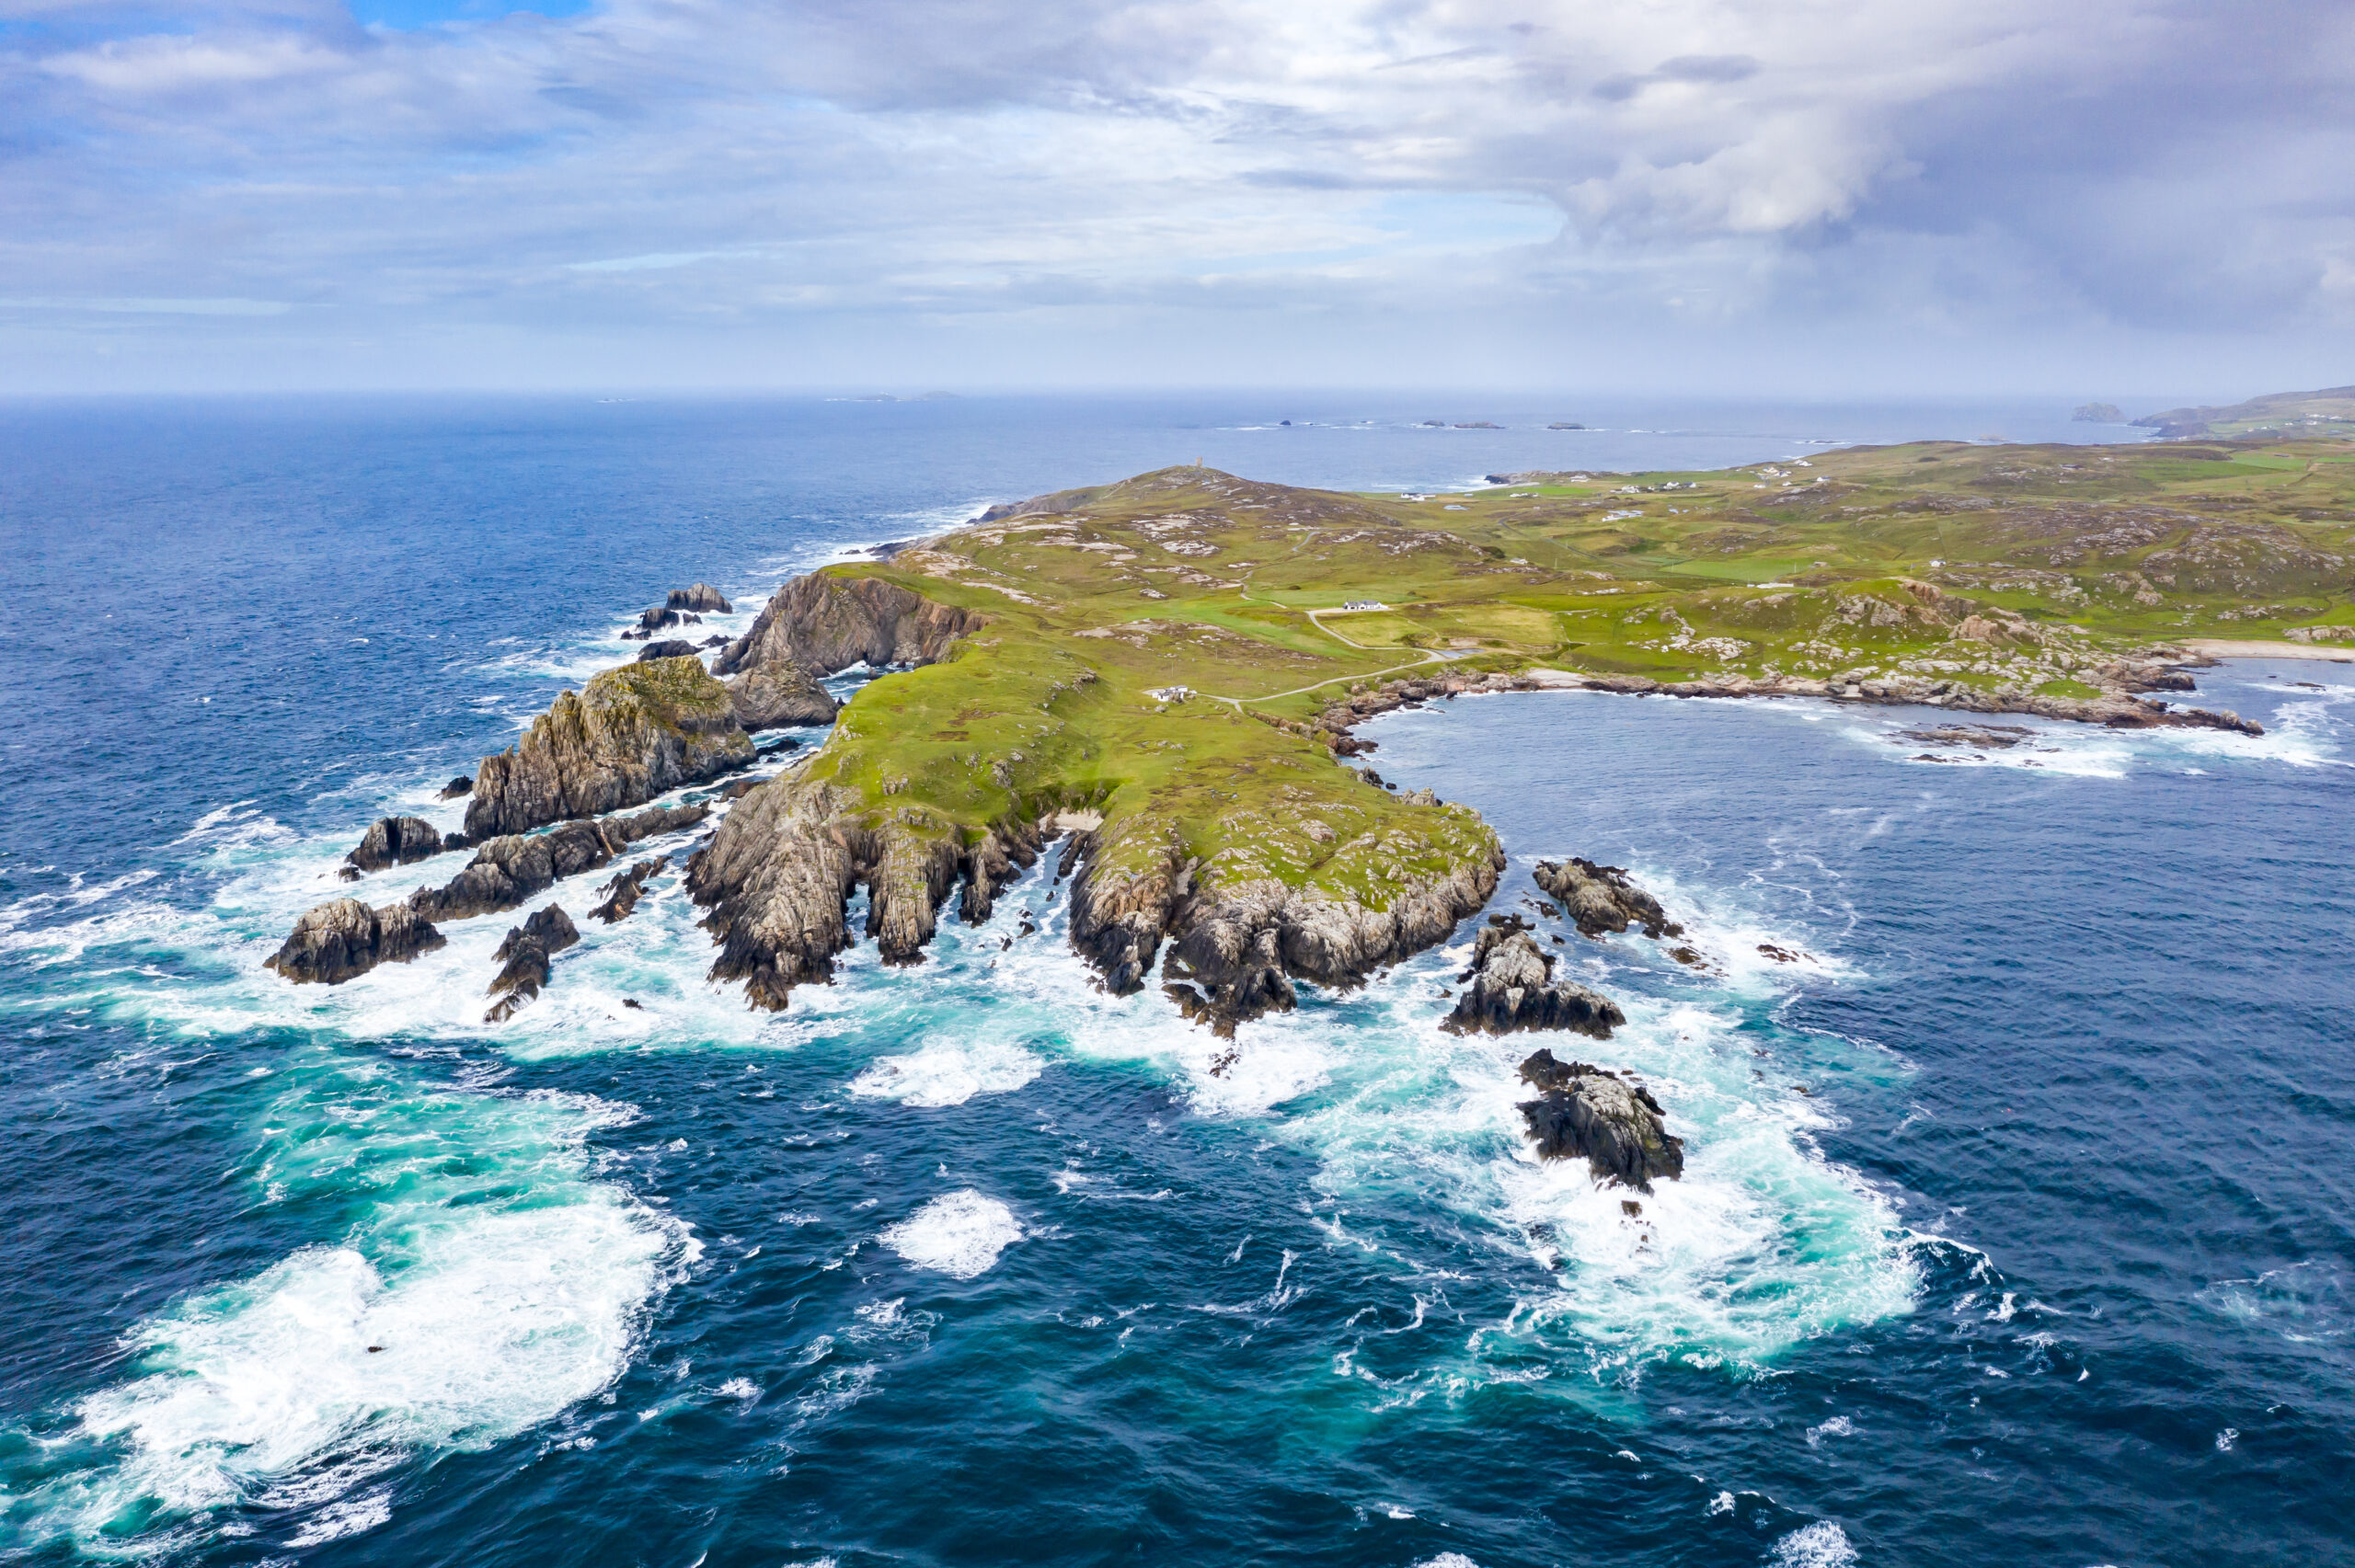 Aerial view of Malin Head Coastline in Donegal